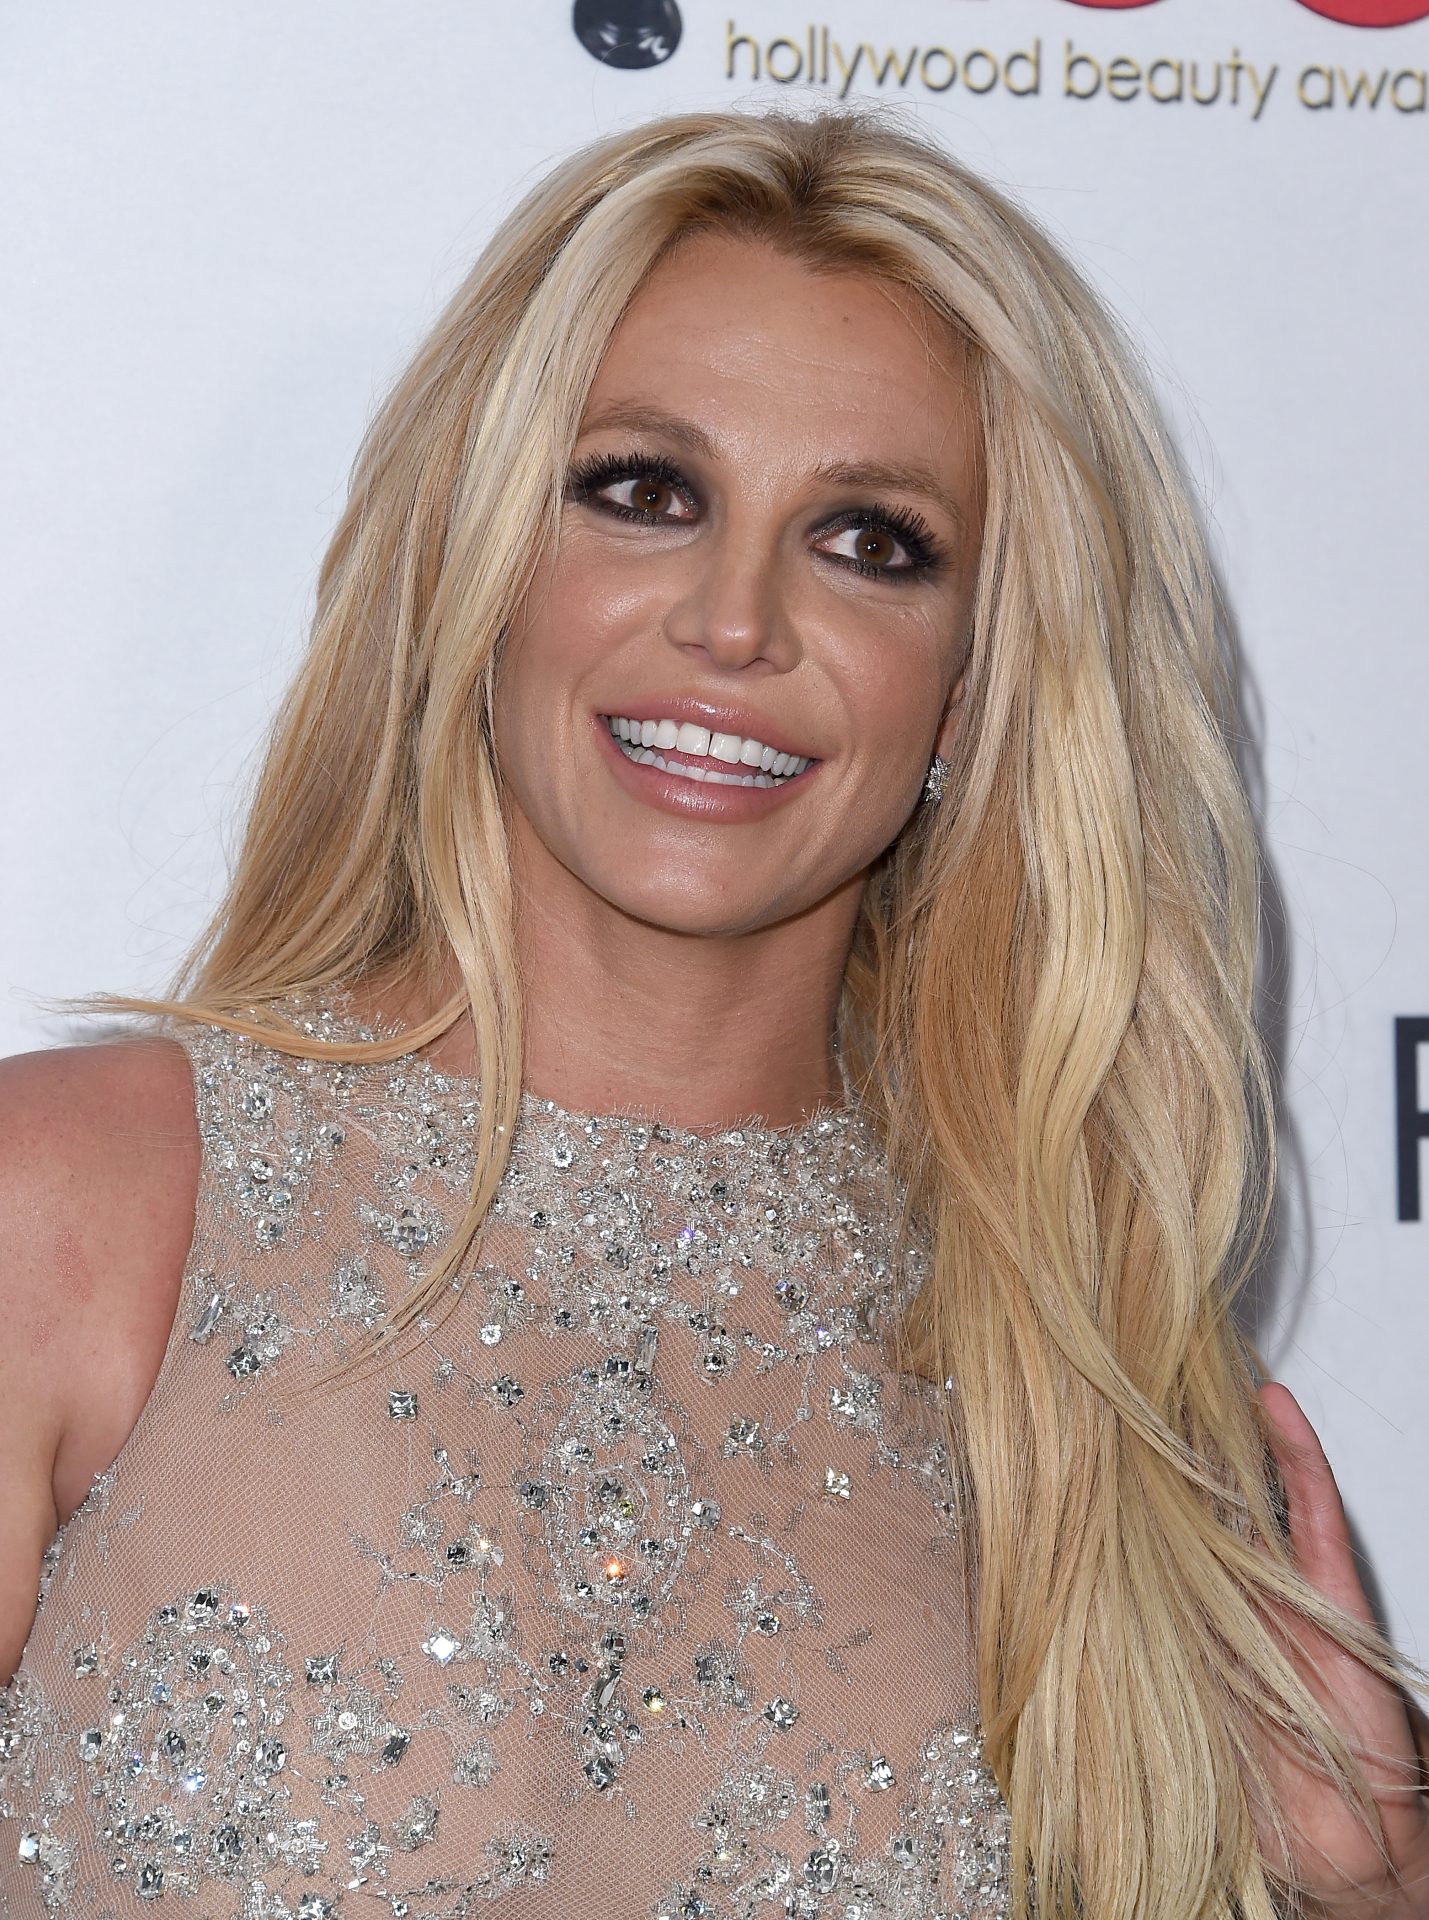 Britney Spears Xxx Toons - The reaction to Britney's holiday photos shows extreme misogyny